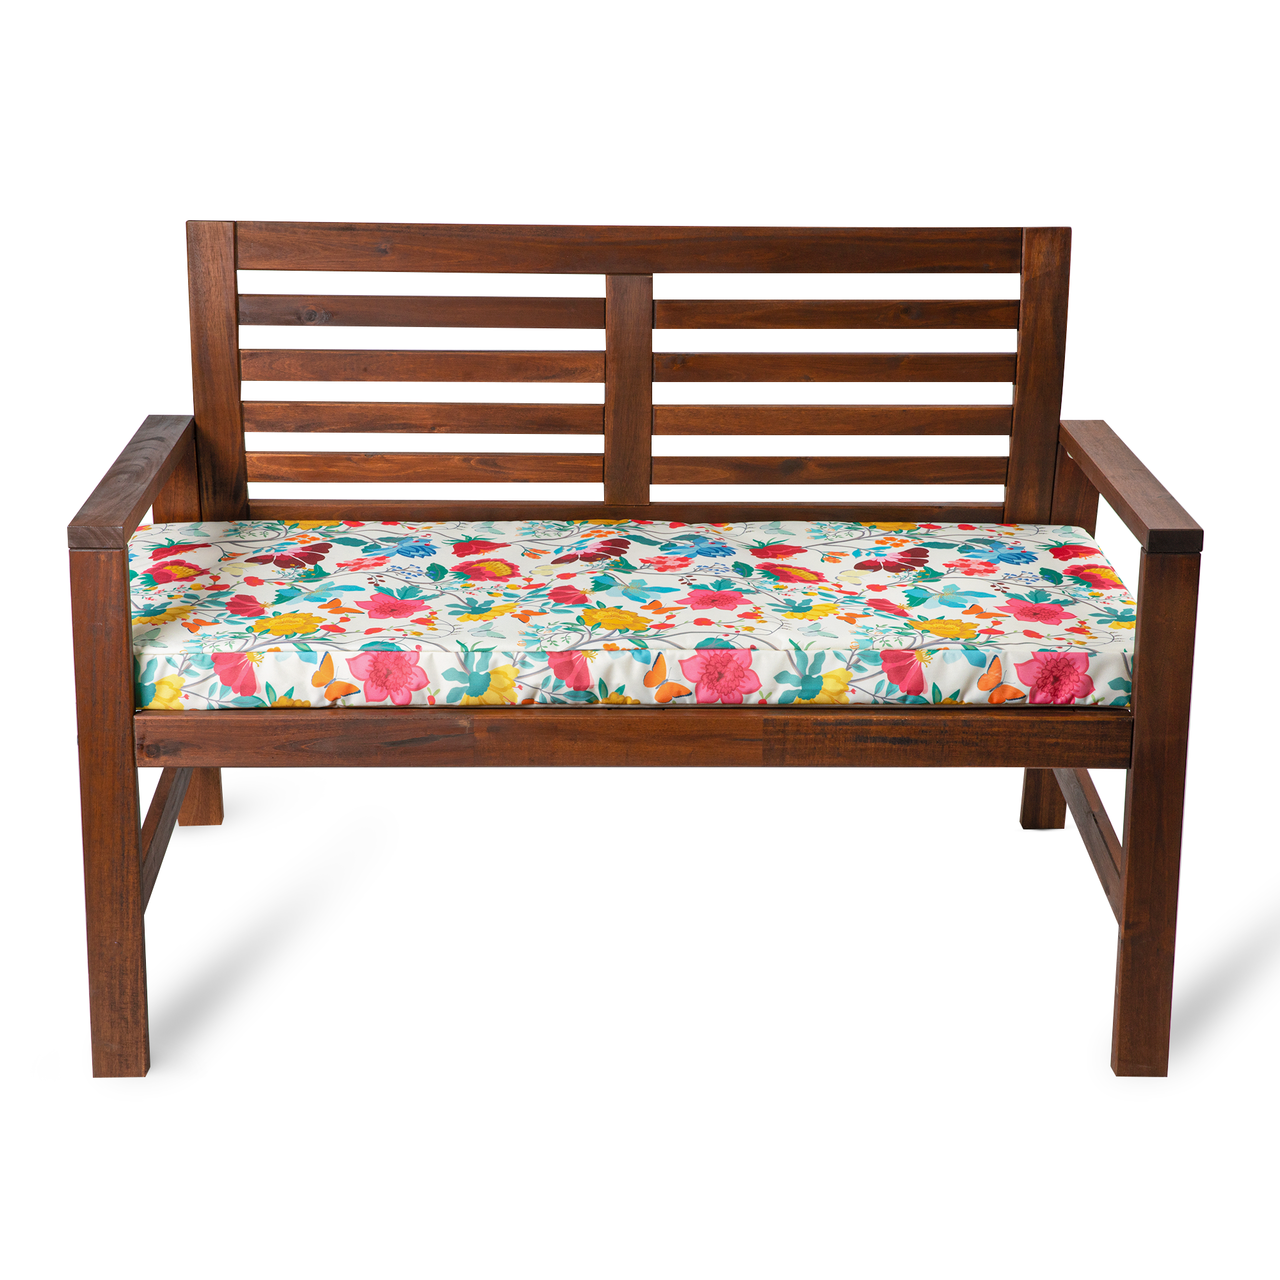 Celina Digby Luxury Water Resistant Garden Outdoor Bench Seat Pad – Midsummer Morning (Available in 2-Seater or 3-Seater Size) (144cm x 54cm 6cm)